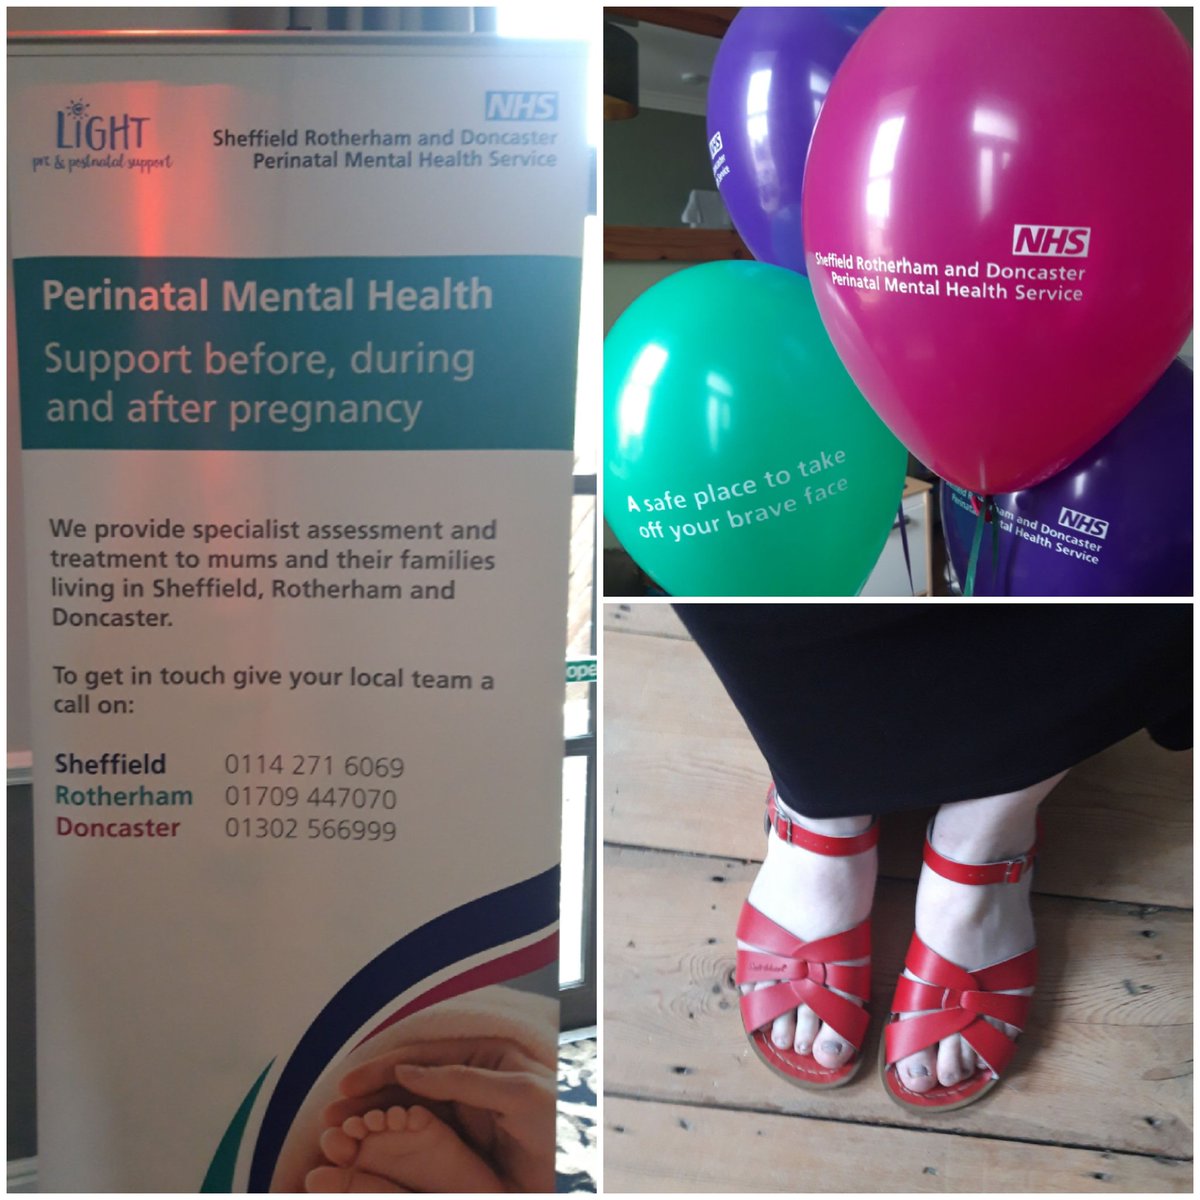 On World Maternal Mental Health Day, I spoke at the launch of local Perinatal Mental Health service. Proud to have shared my story & to speak in public about my experience for the 1st time. #srdpmhlaunch #WorldMaternalMentalHealthDay #mumsmatter #maternalmhmatters